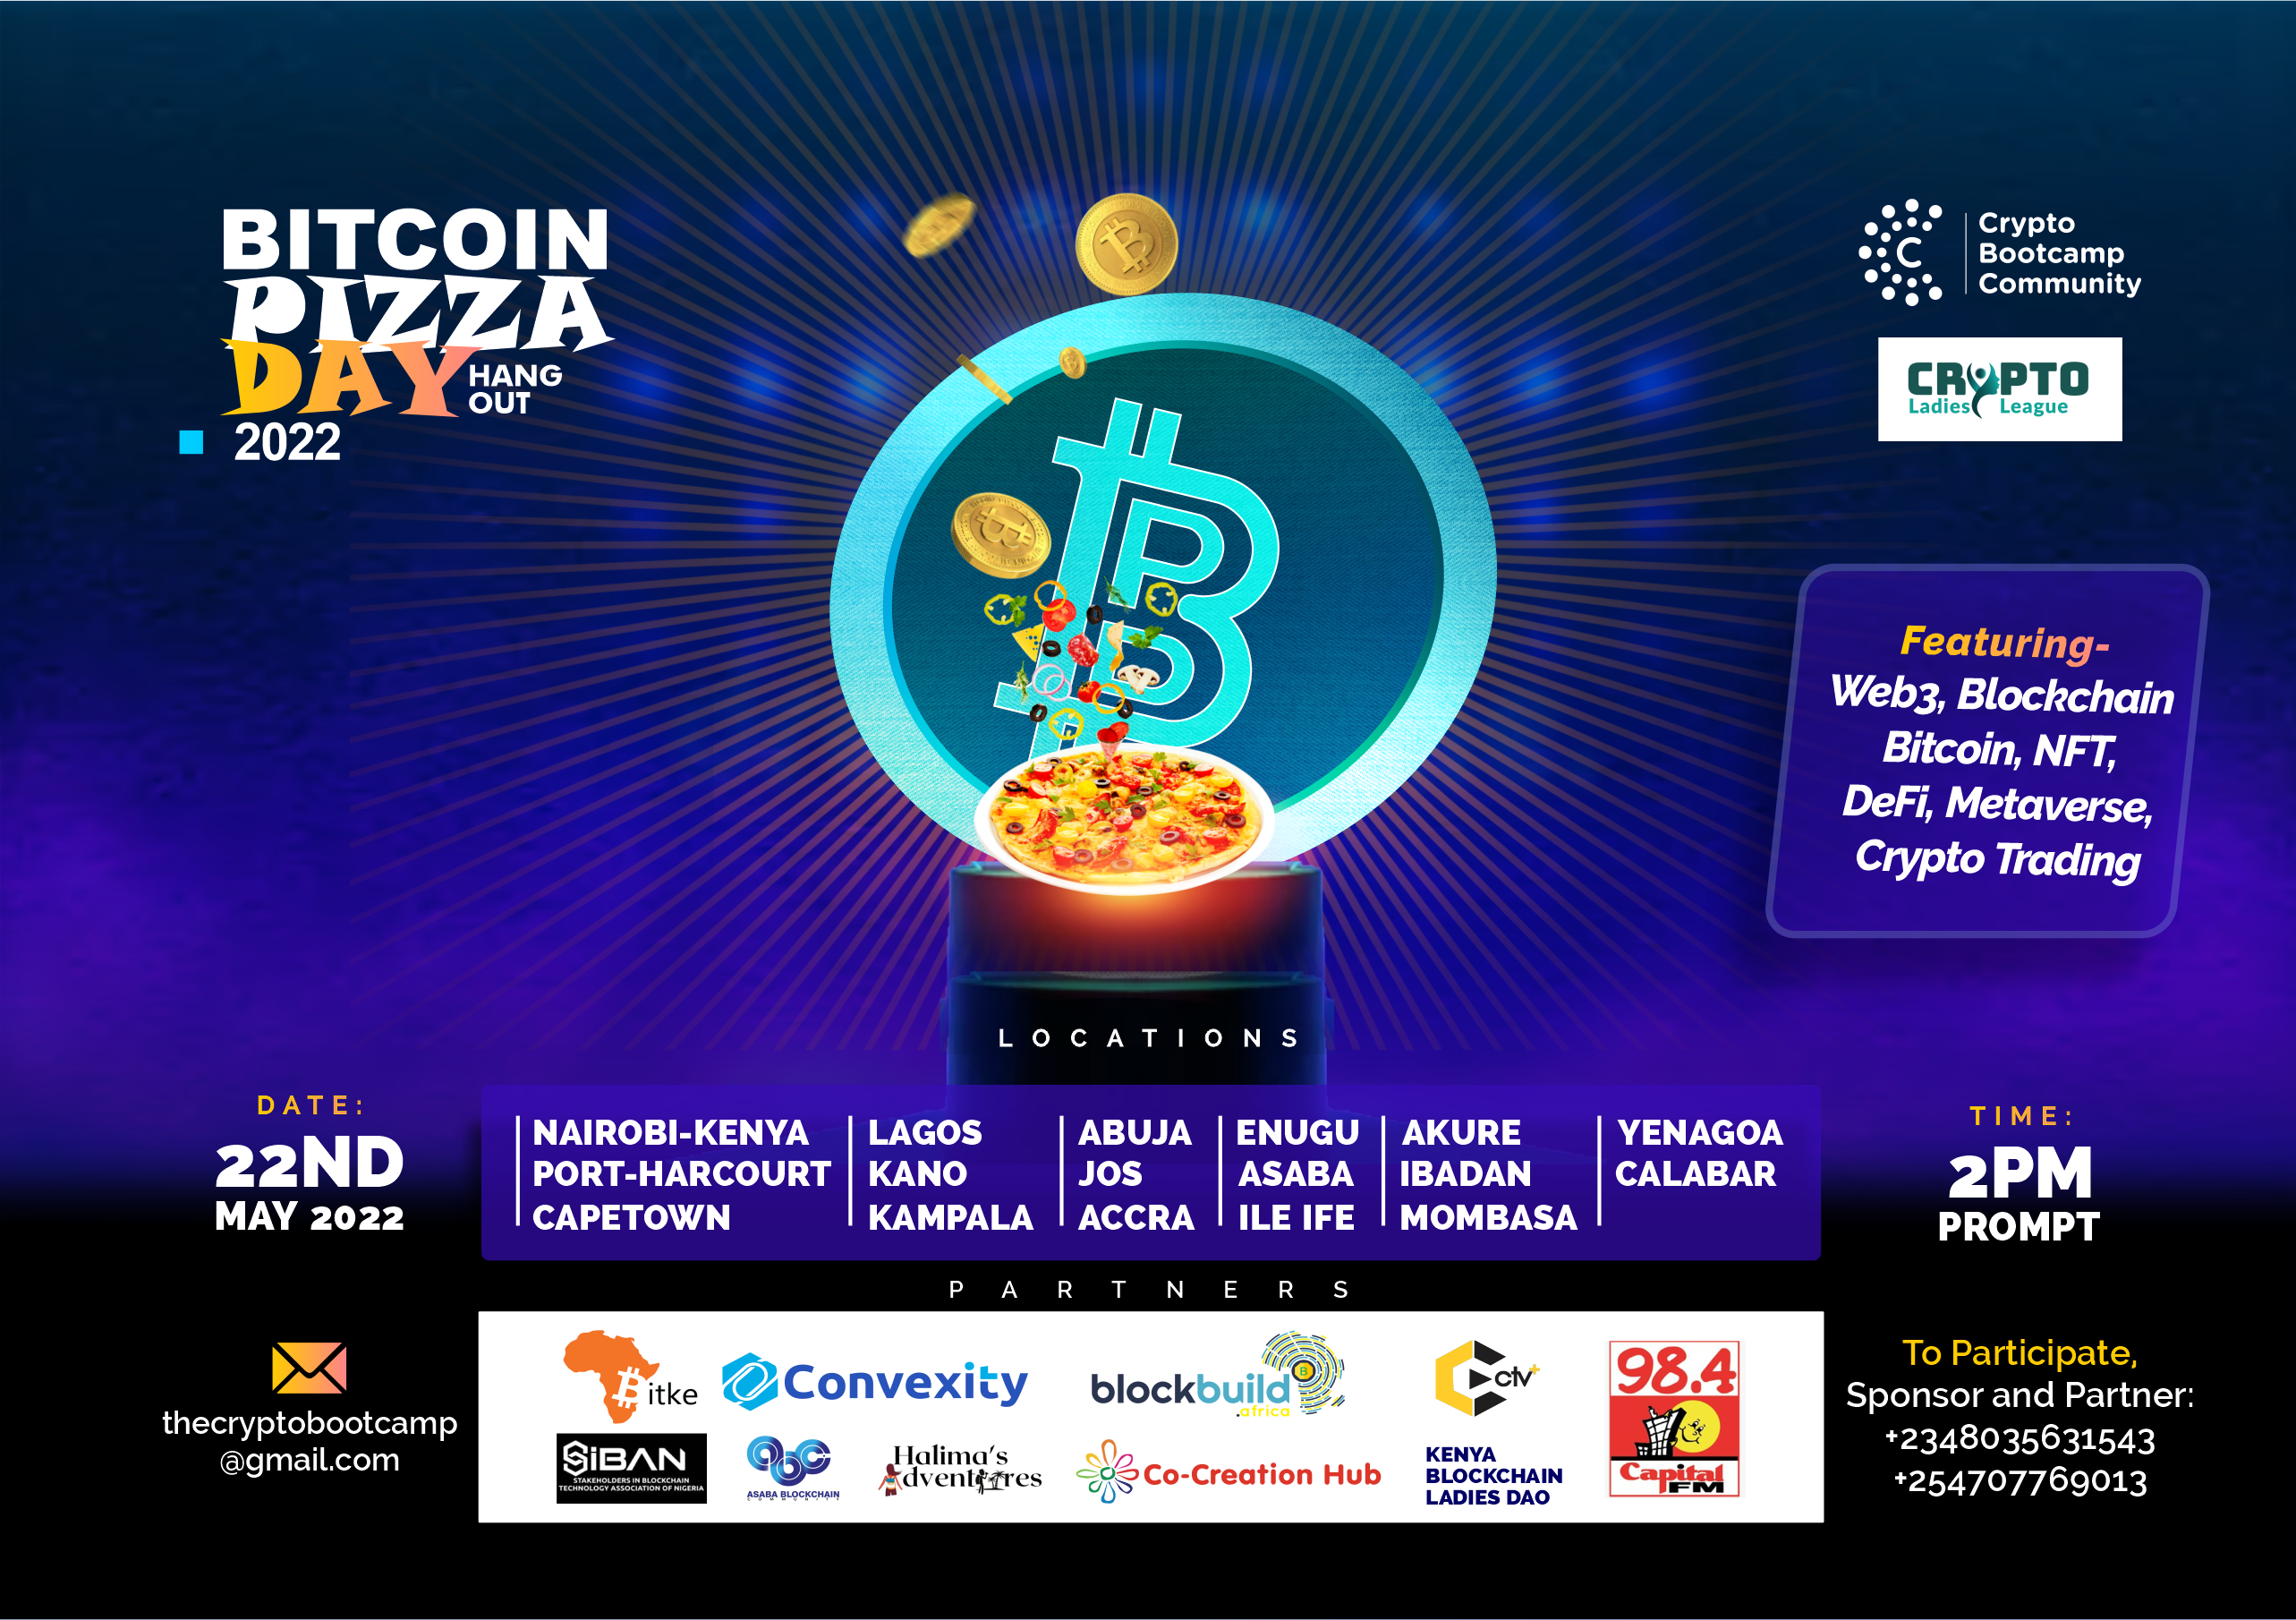 Crypto Bootcamp Community in Collaboration with Major Crypto Partners Celebrates Bitcoin Pizza Day Across 20 Cities in Africa. 